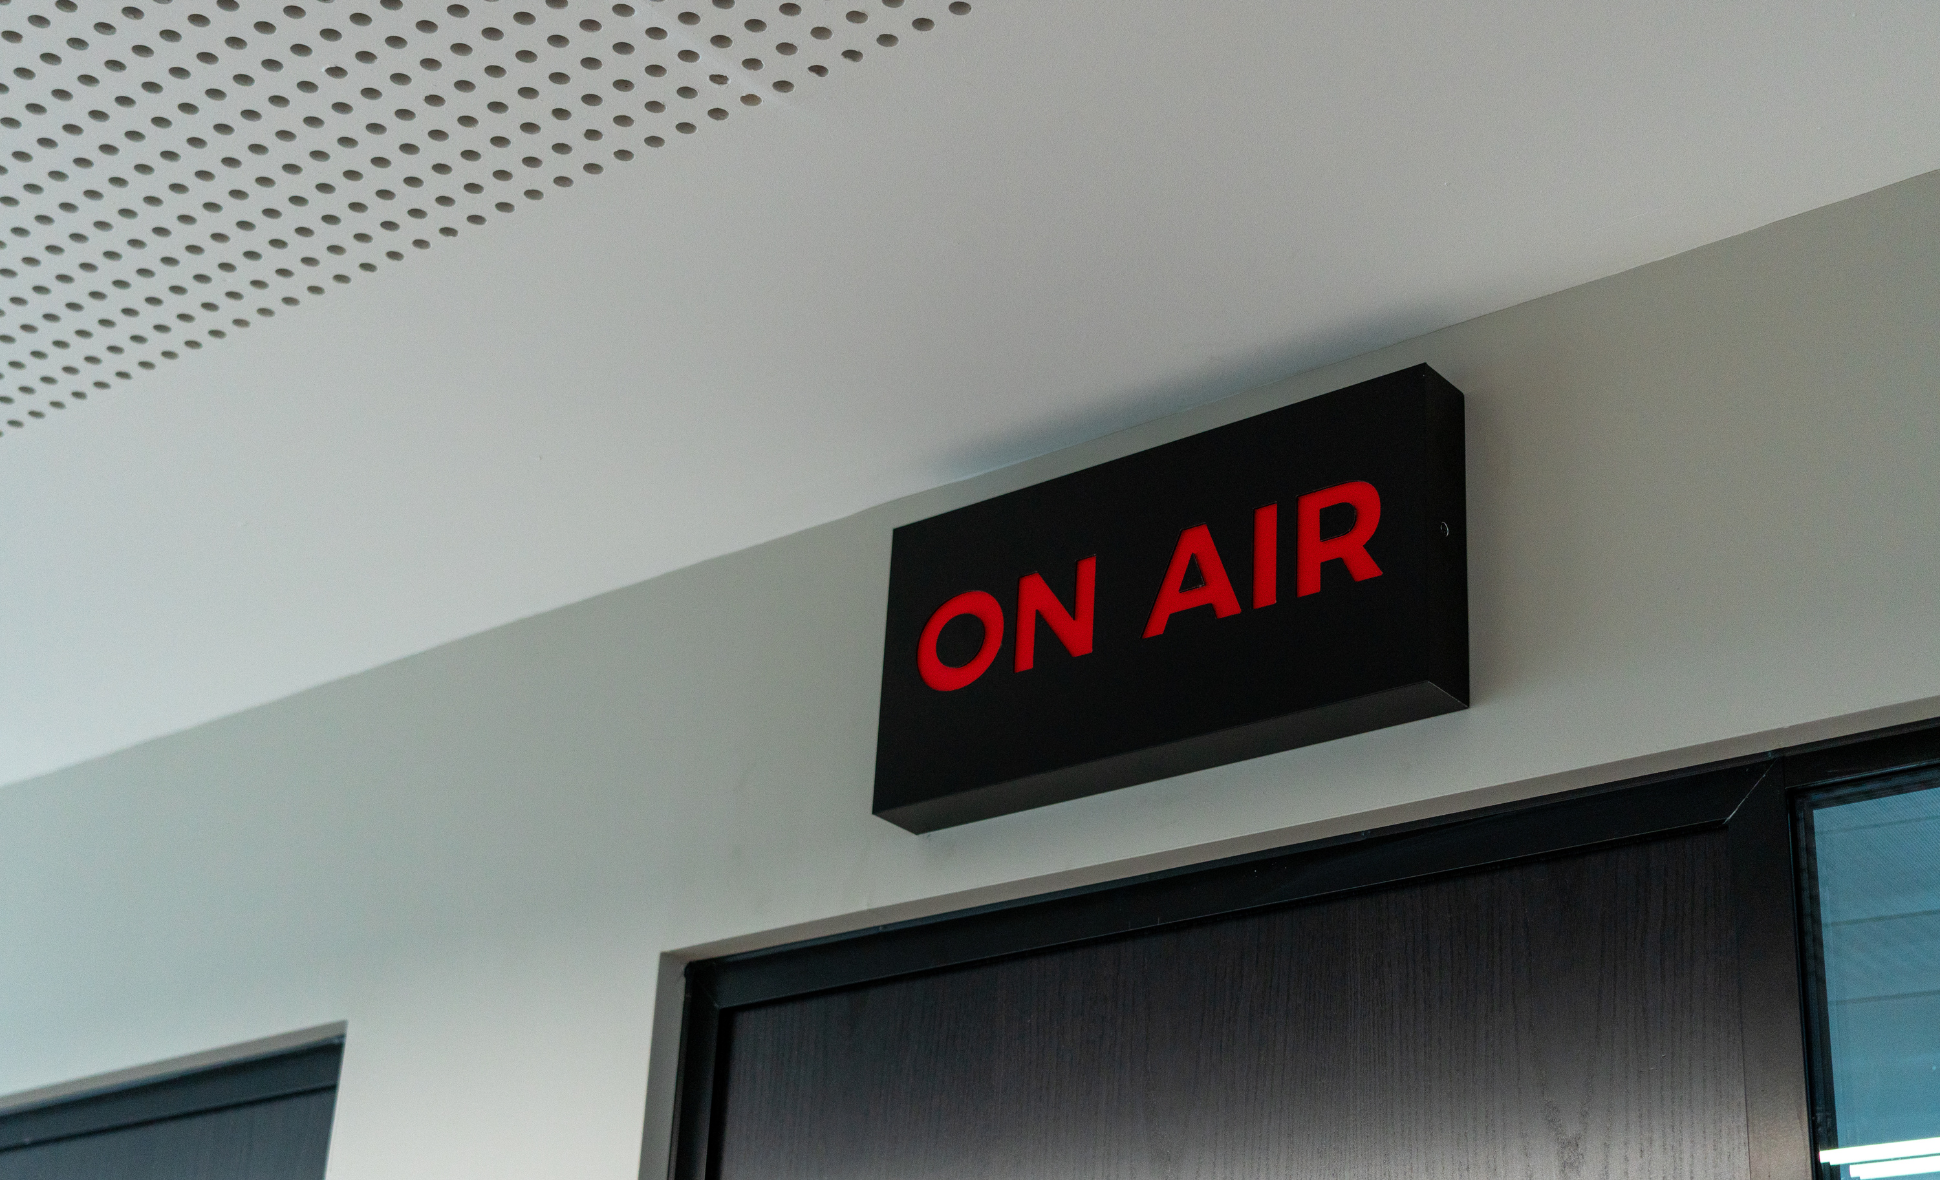 An on air sign in an office.